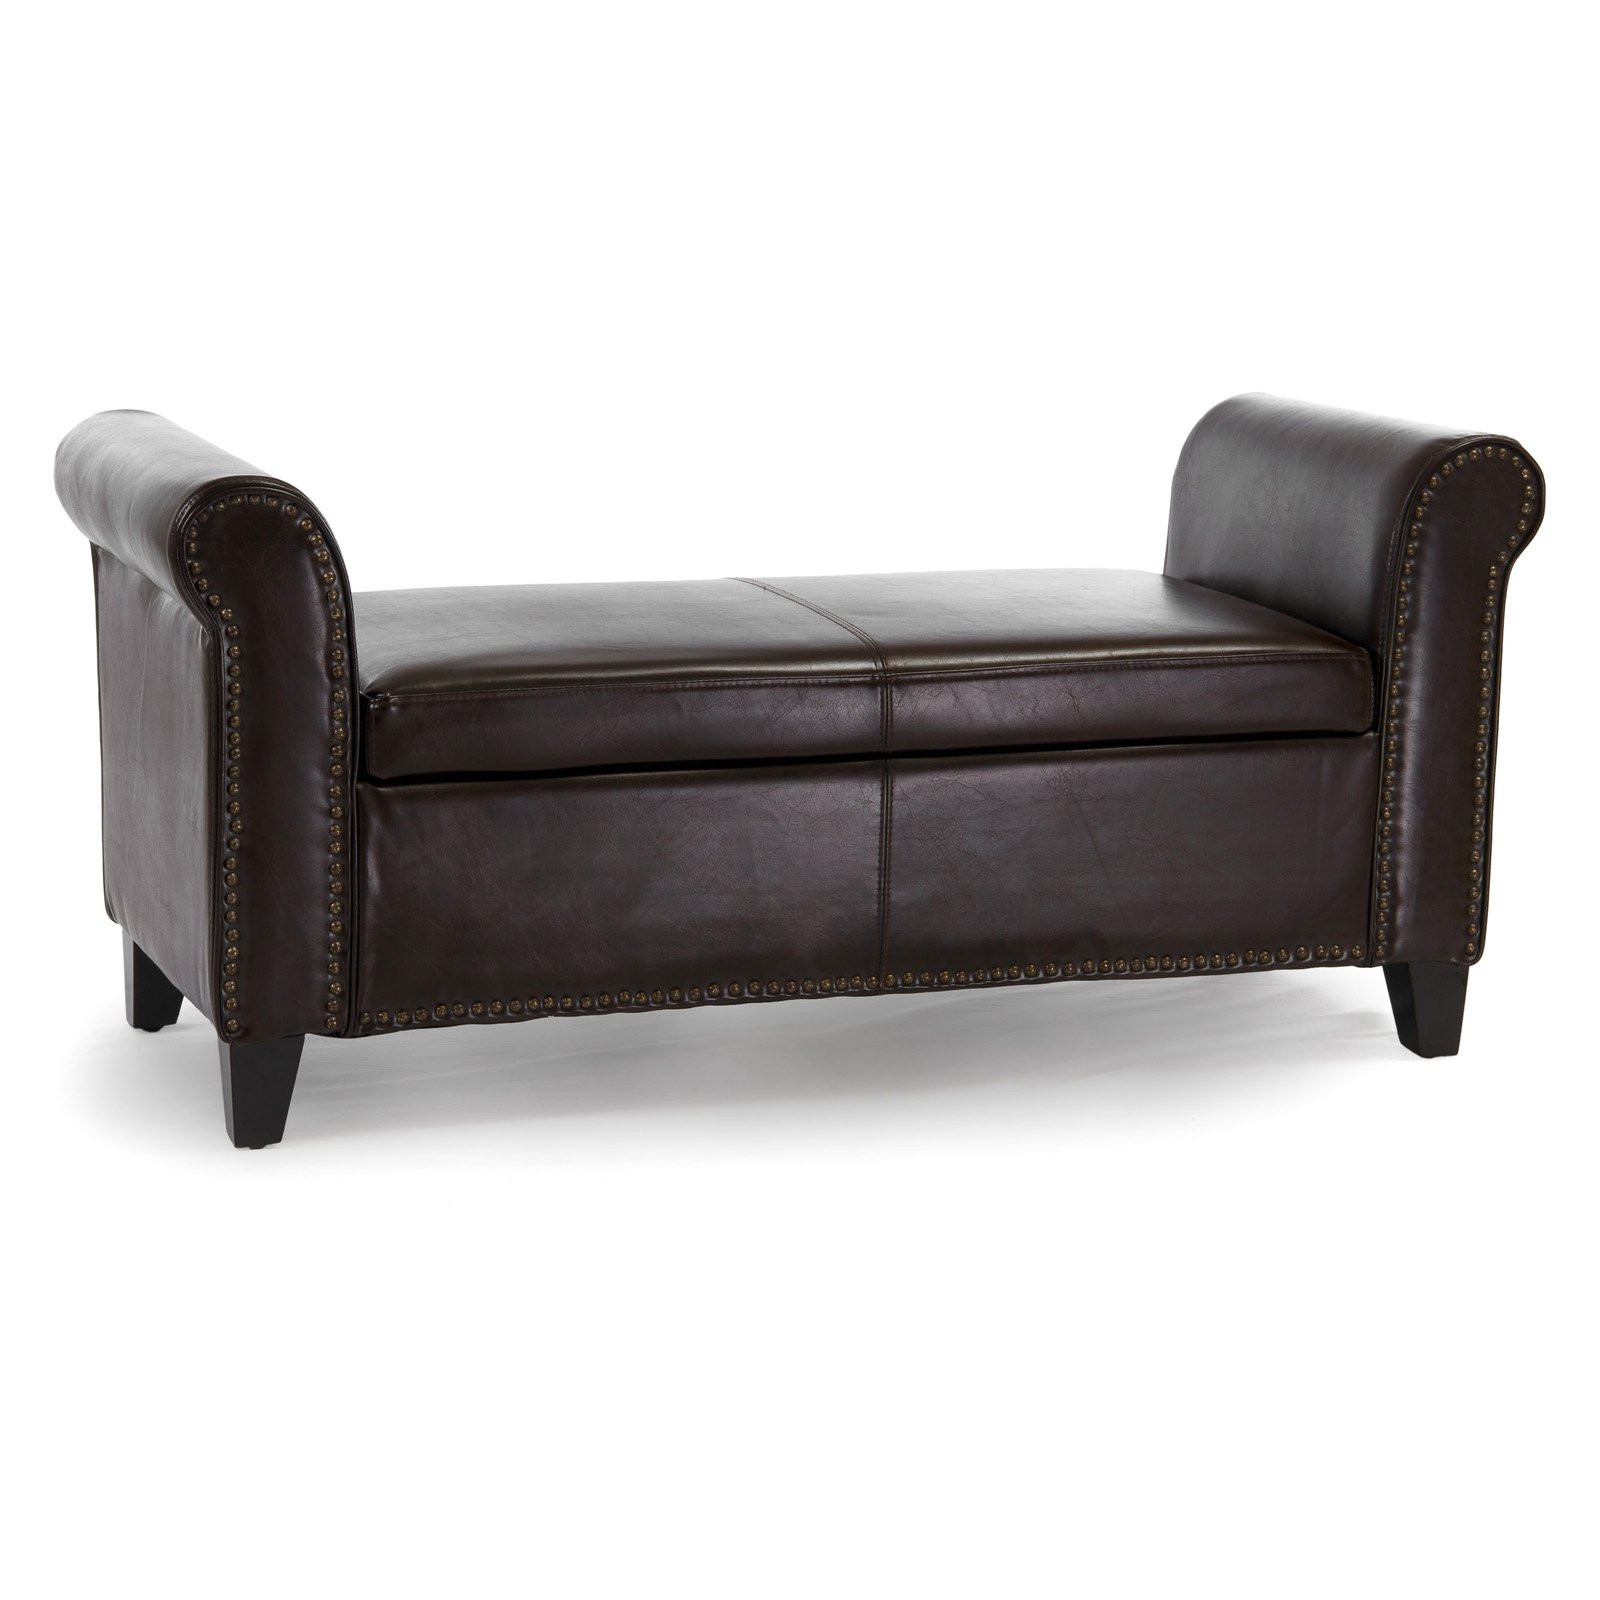 Leather Bench With Storage
 Hemmingway Brown Bonded Leather Armed Storage Bench